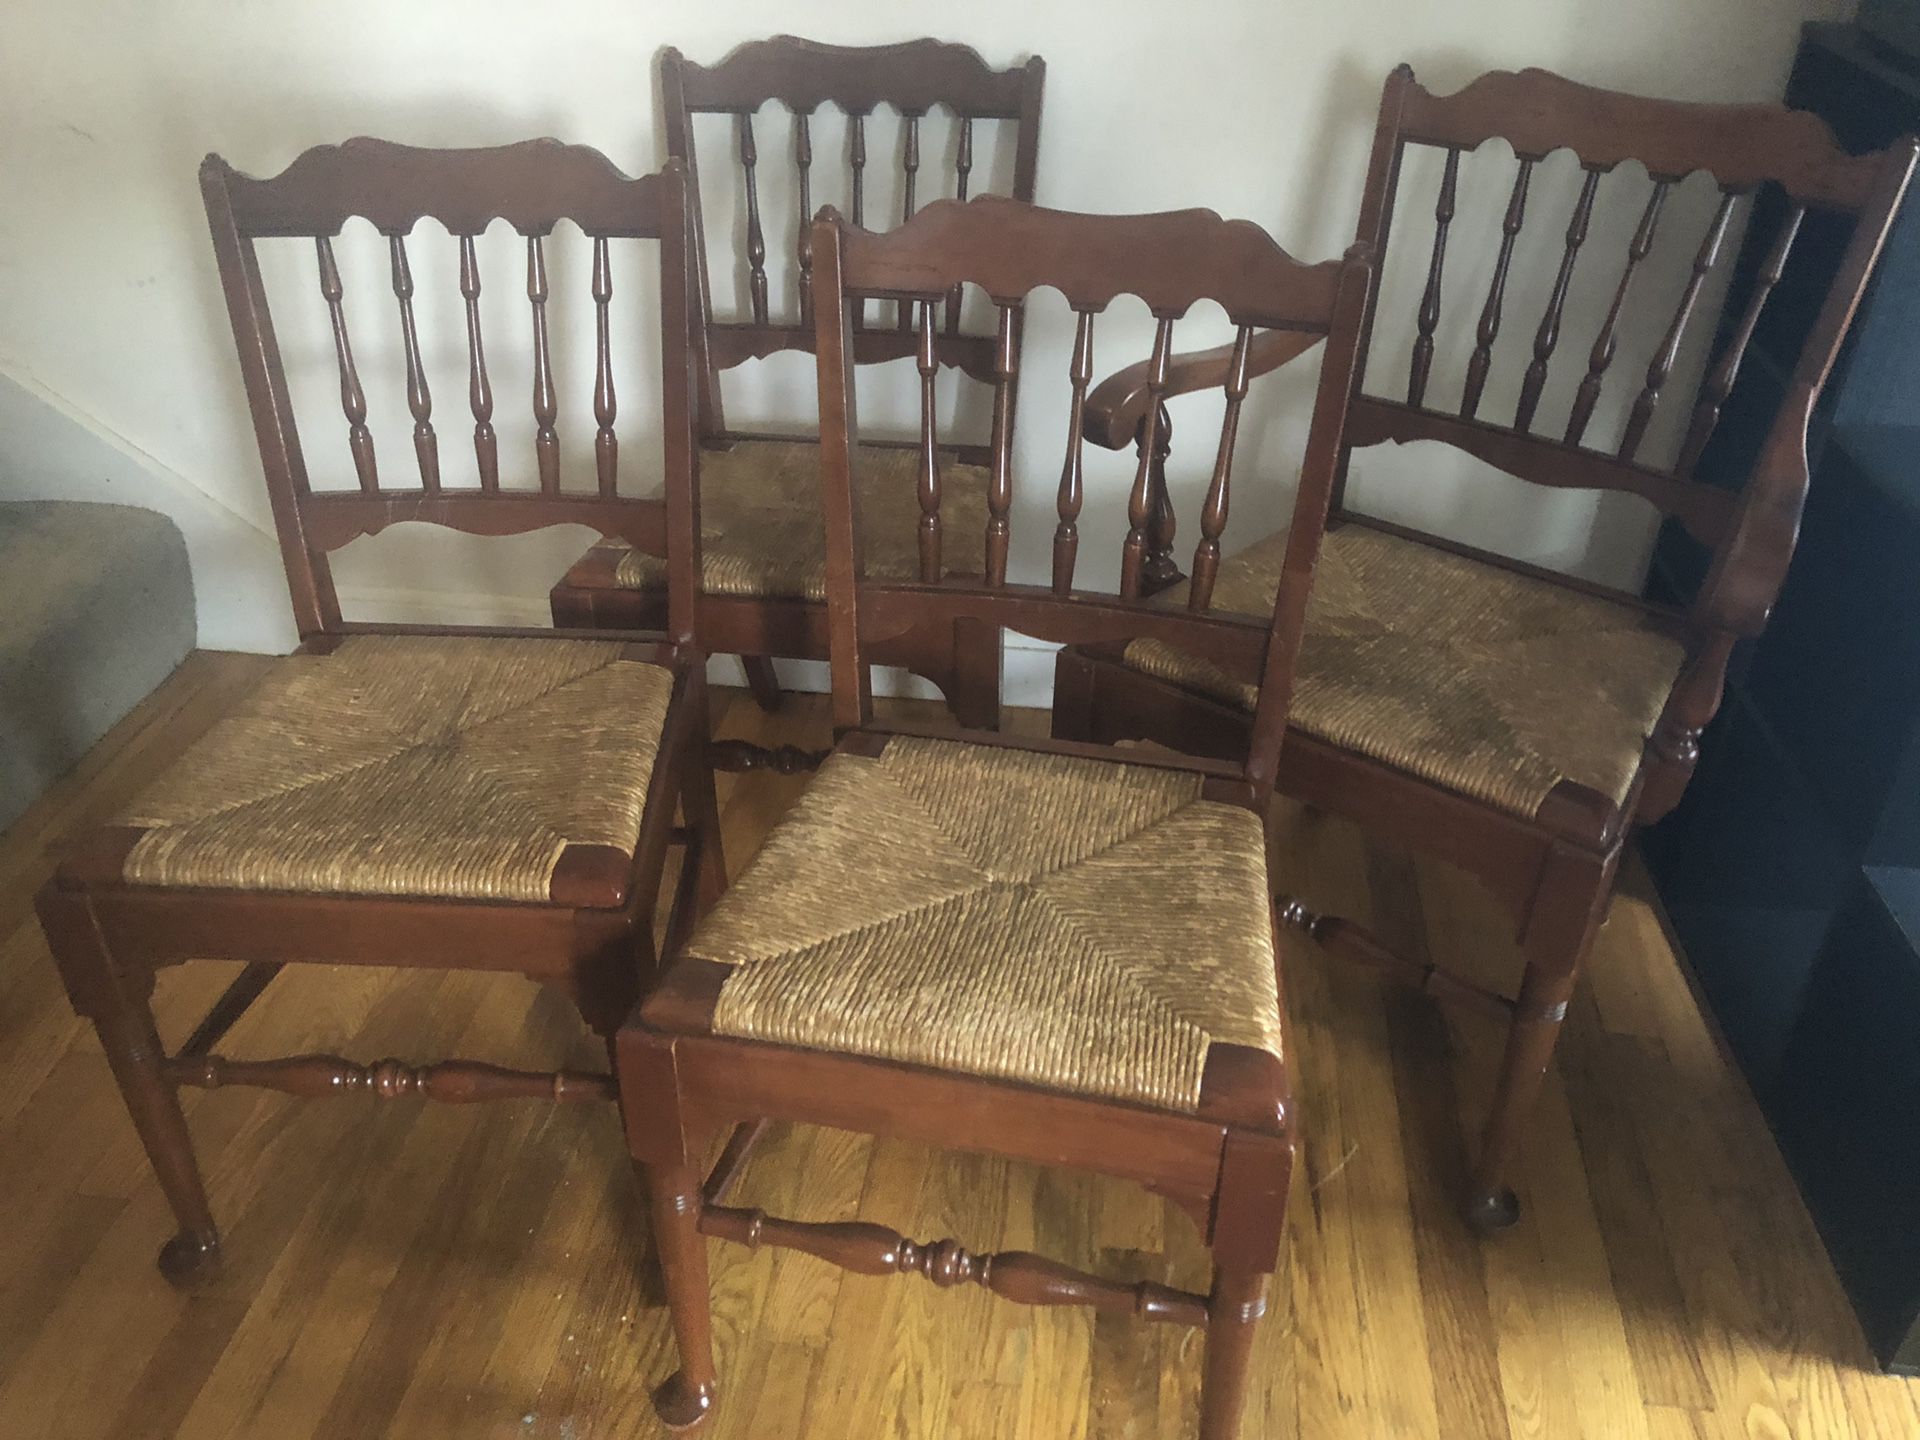 Pennsylvania House Antique Dining Chairs - Set of 4